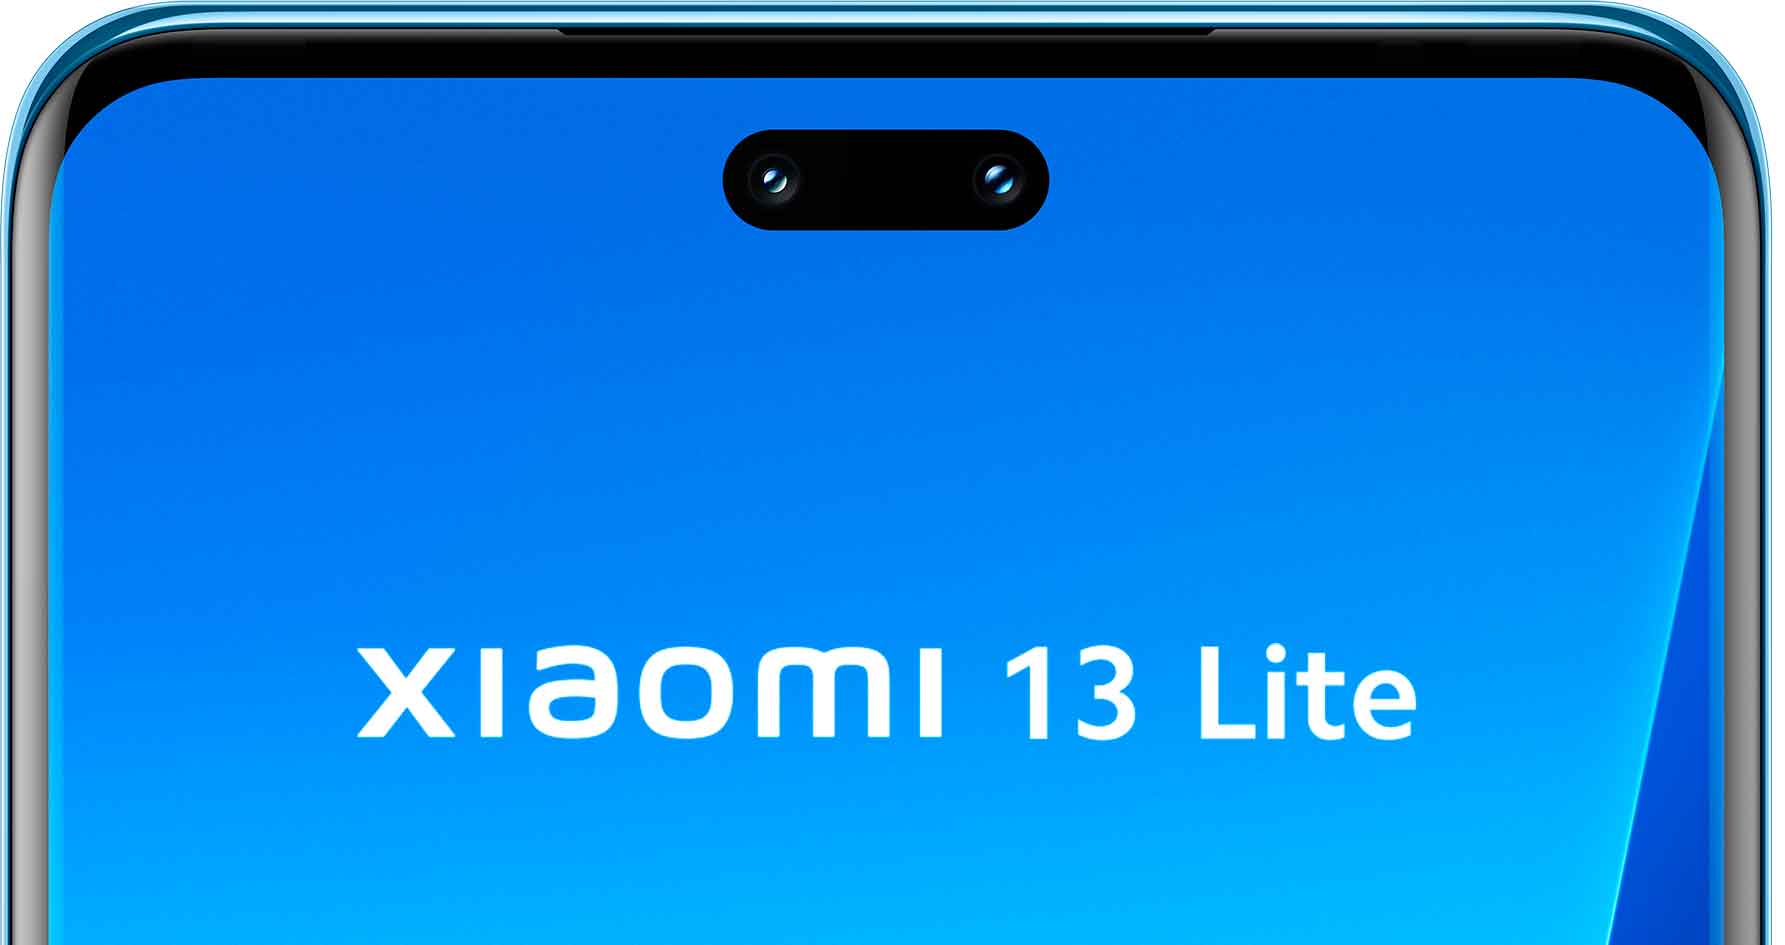 The Xiaomi 13 series reinvents itself in a big way and opens the MWC 2023